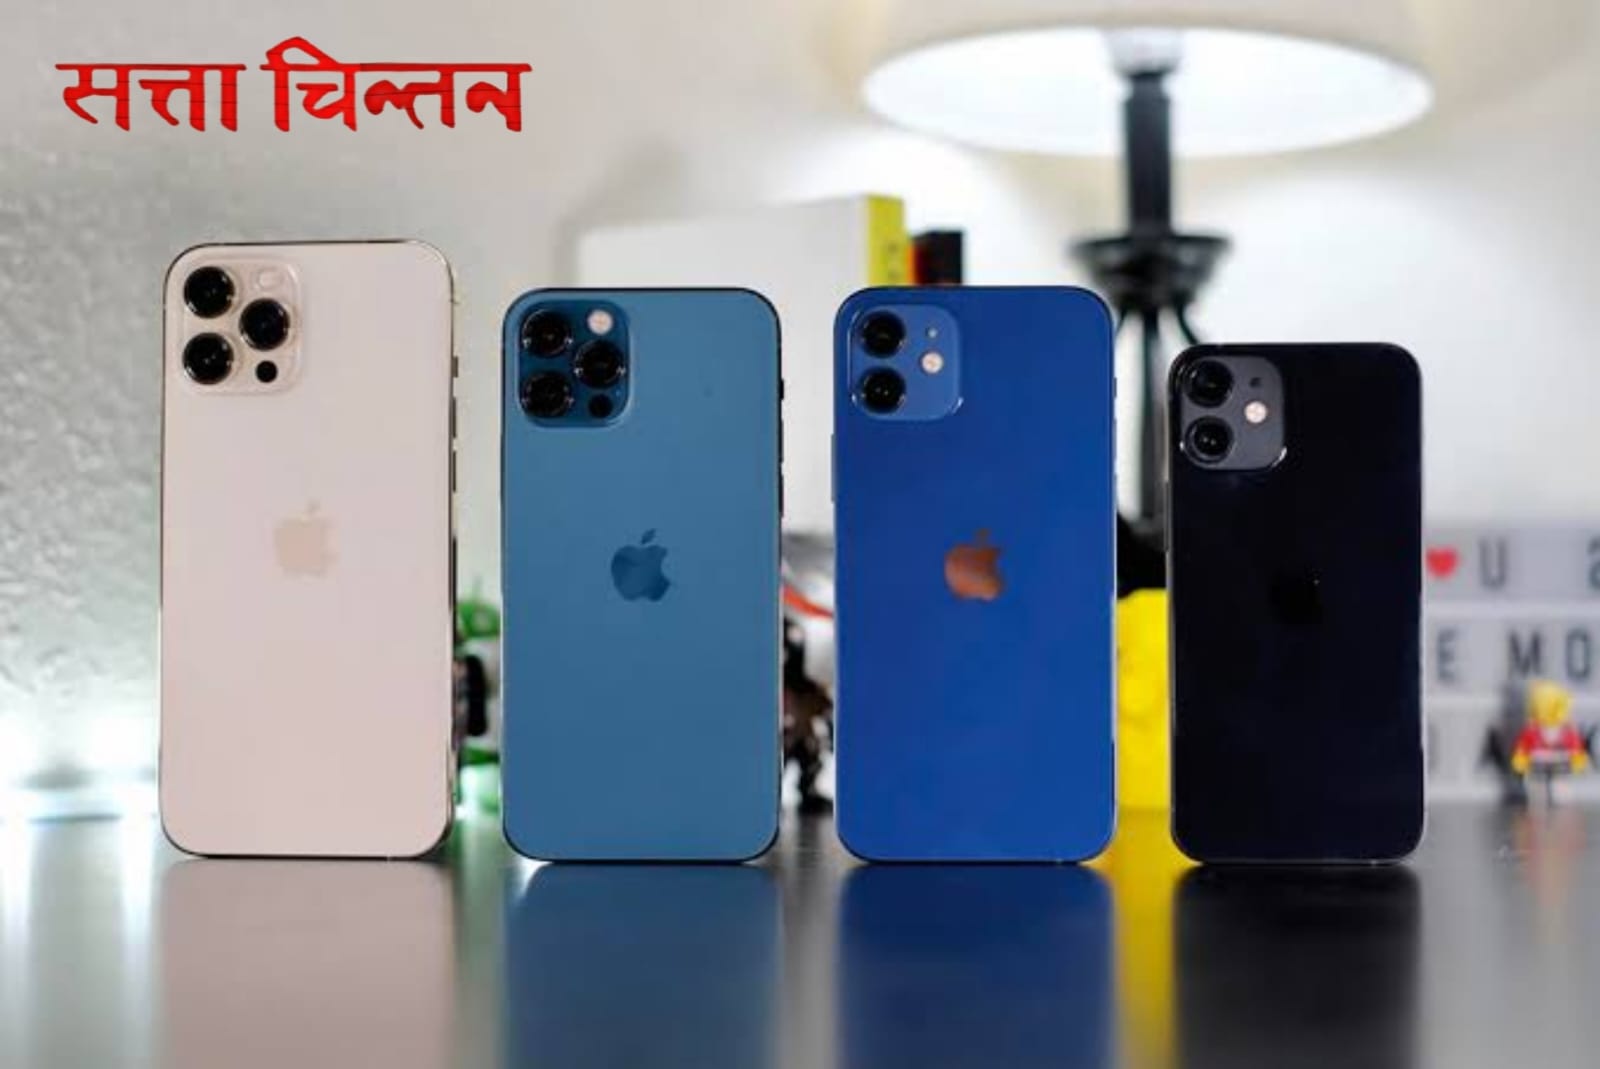 Own an iPhone under ₹50K in Flipkart and Amazon sale: This is the way